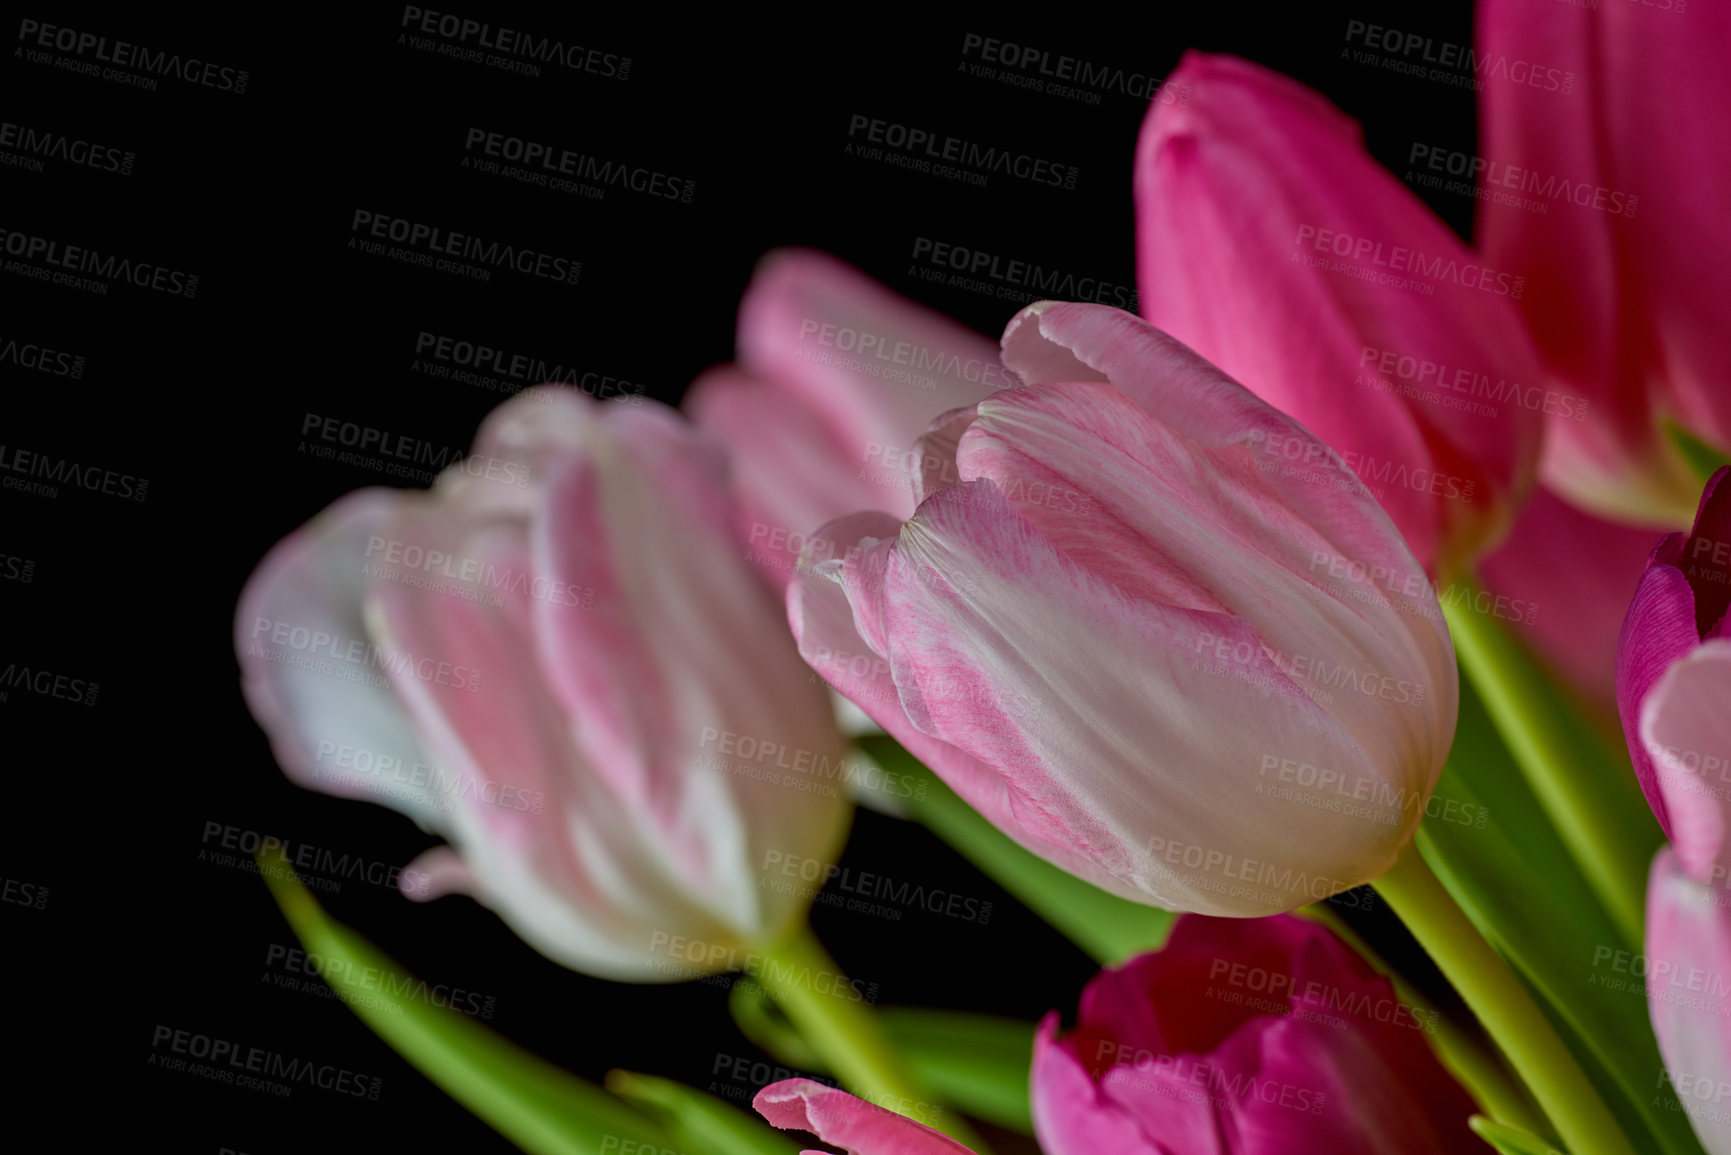 Buy stock photo Closeup of pink tulips growing, blossoming, flowering against black background. Macro view of a bunch of flowers blooming. Horticulture, cultivation of decorative plants symbolising love or affection